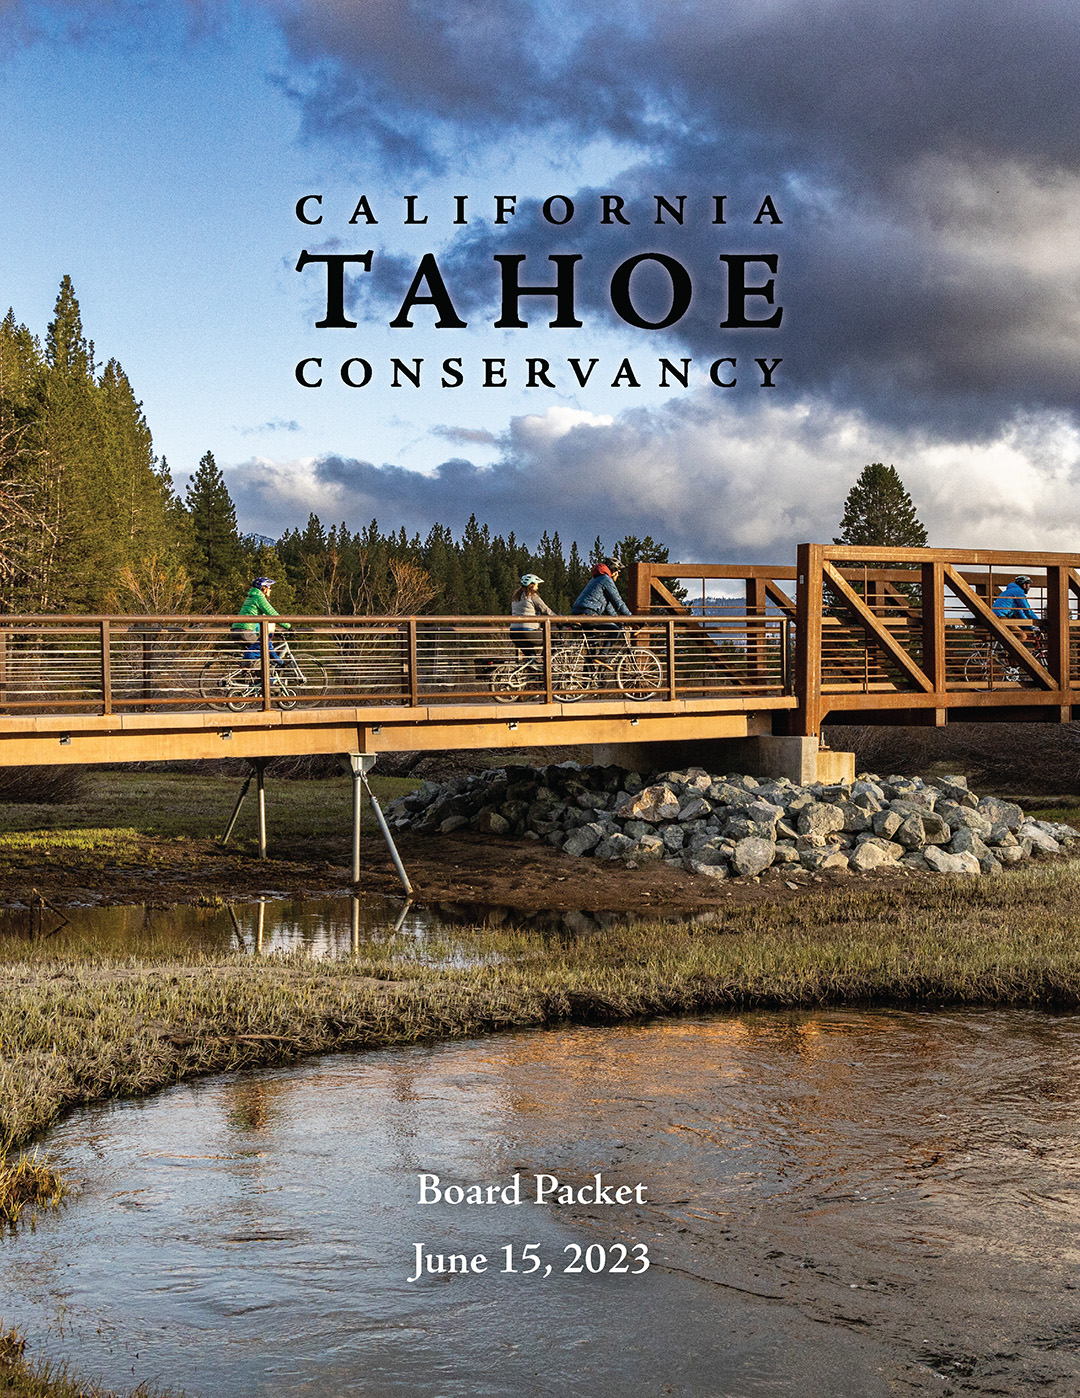 People biking on a raised boardwalk and bridge over a river, and text saying California Tahoe Conservancy Board Book June 15, 2023